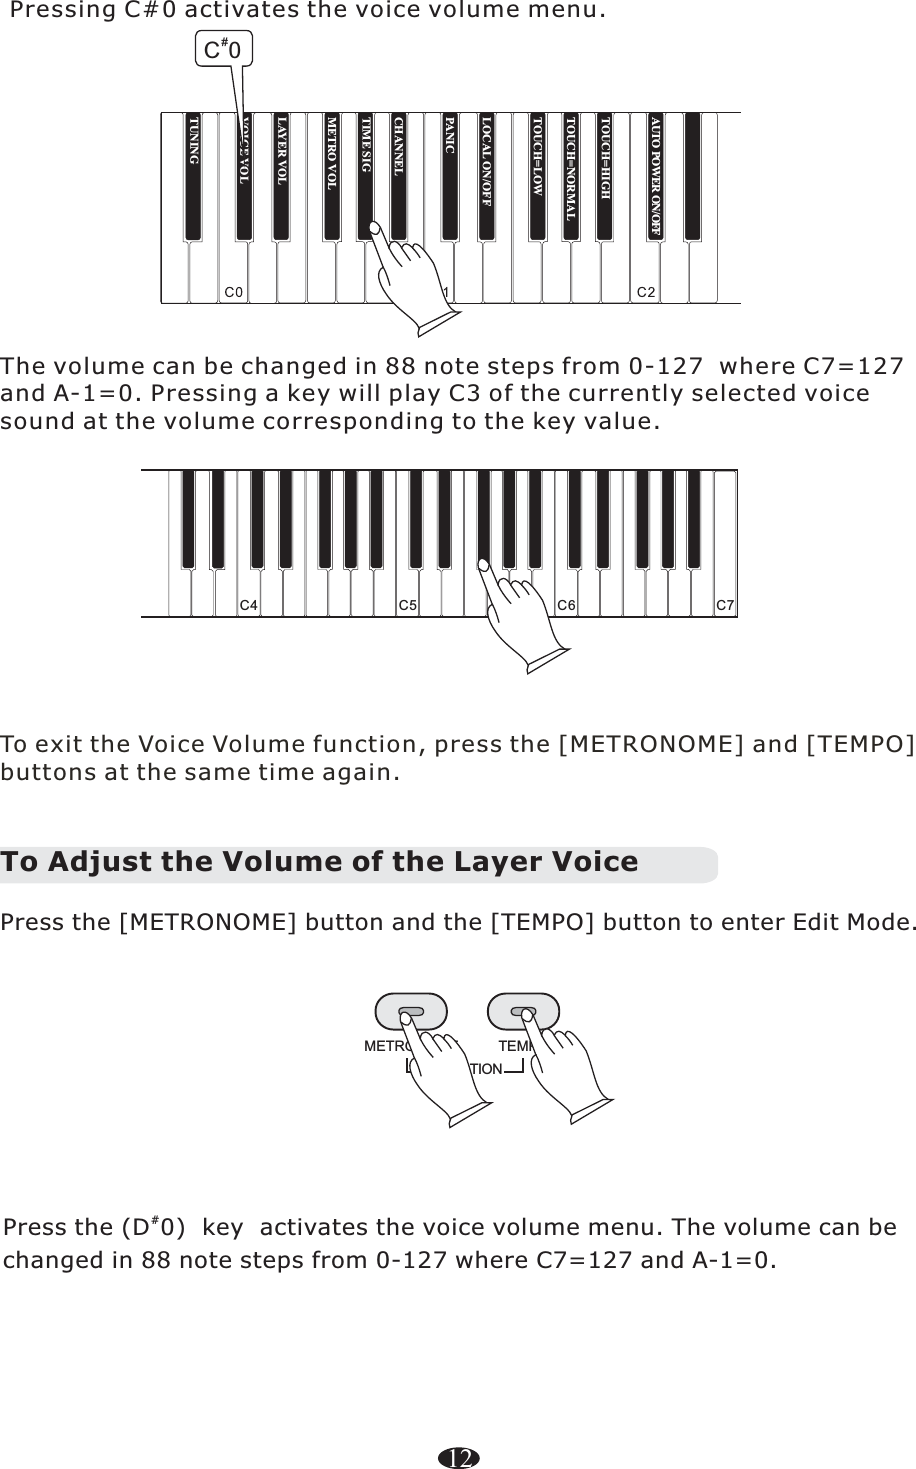 12#Press the (D 0)  key  activates the voice volume menu. The volume can be changed in 88 note steps from 0-127 where C7=127 and A-1=0.    To exit the Voice Volume function, press the [METRONOME] and [TEMPO] buttons at the same time again.The volume can be changed in 88 note steps from 0-127  where C7=127 and A-1=0. Pressing a key will play C3 of the currently selected voice sound at the volume corresponding to the key value.C4 C5 C6 C7FUNCTIONTEMPOMETRONOMETo Adjust the Volume of the Layer Voice    Press the [METRONOME] button and the [TEMPO] button to enter Edit Mode.Pressing C#0 activates the voice volume menu. TUNINGTOUCH=HIGHTOUCH=NORMALTOUCH=LOWLOCAL ON/OFFPANICCHANNELTIME SIGMETRO VOLLAYER VOLVOICE VOL#C0AUTO POWER ON/OFF